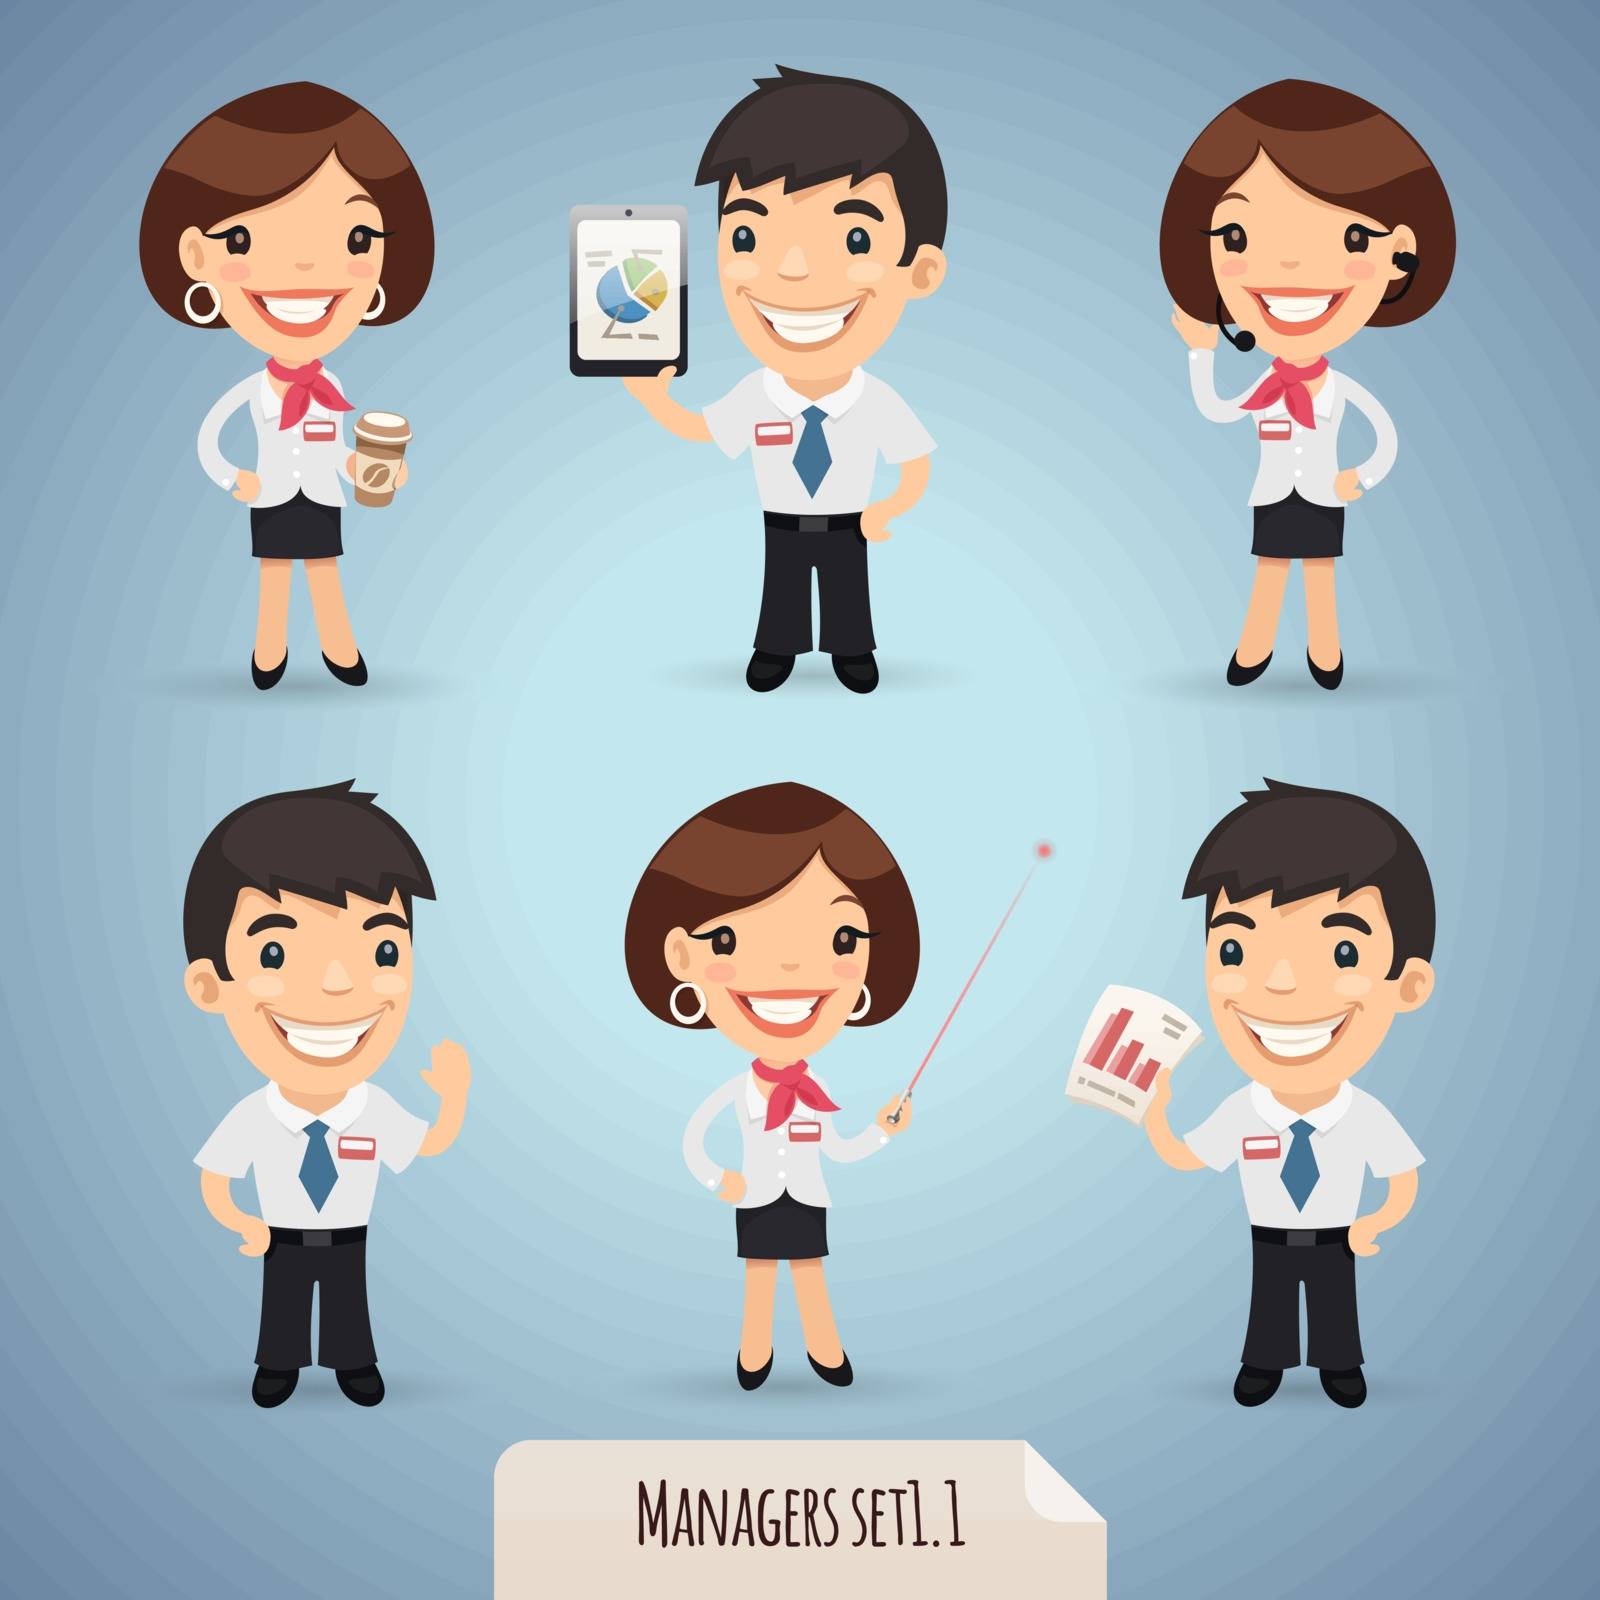 Managers Cartoon Characters Set1.1 by voysla